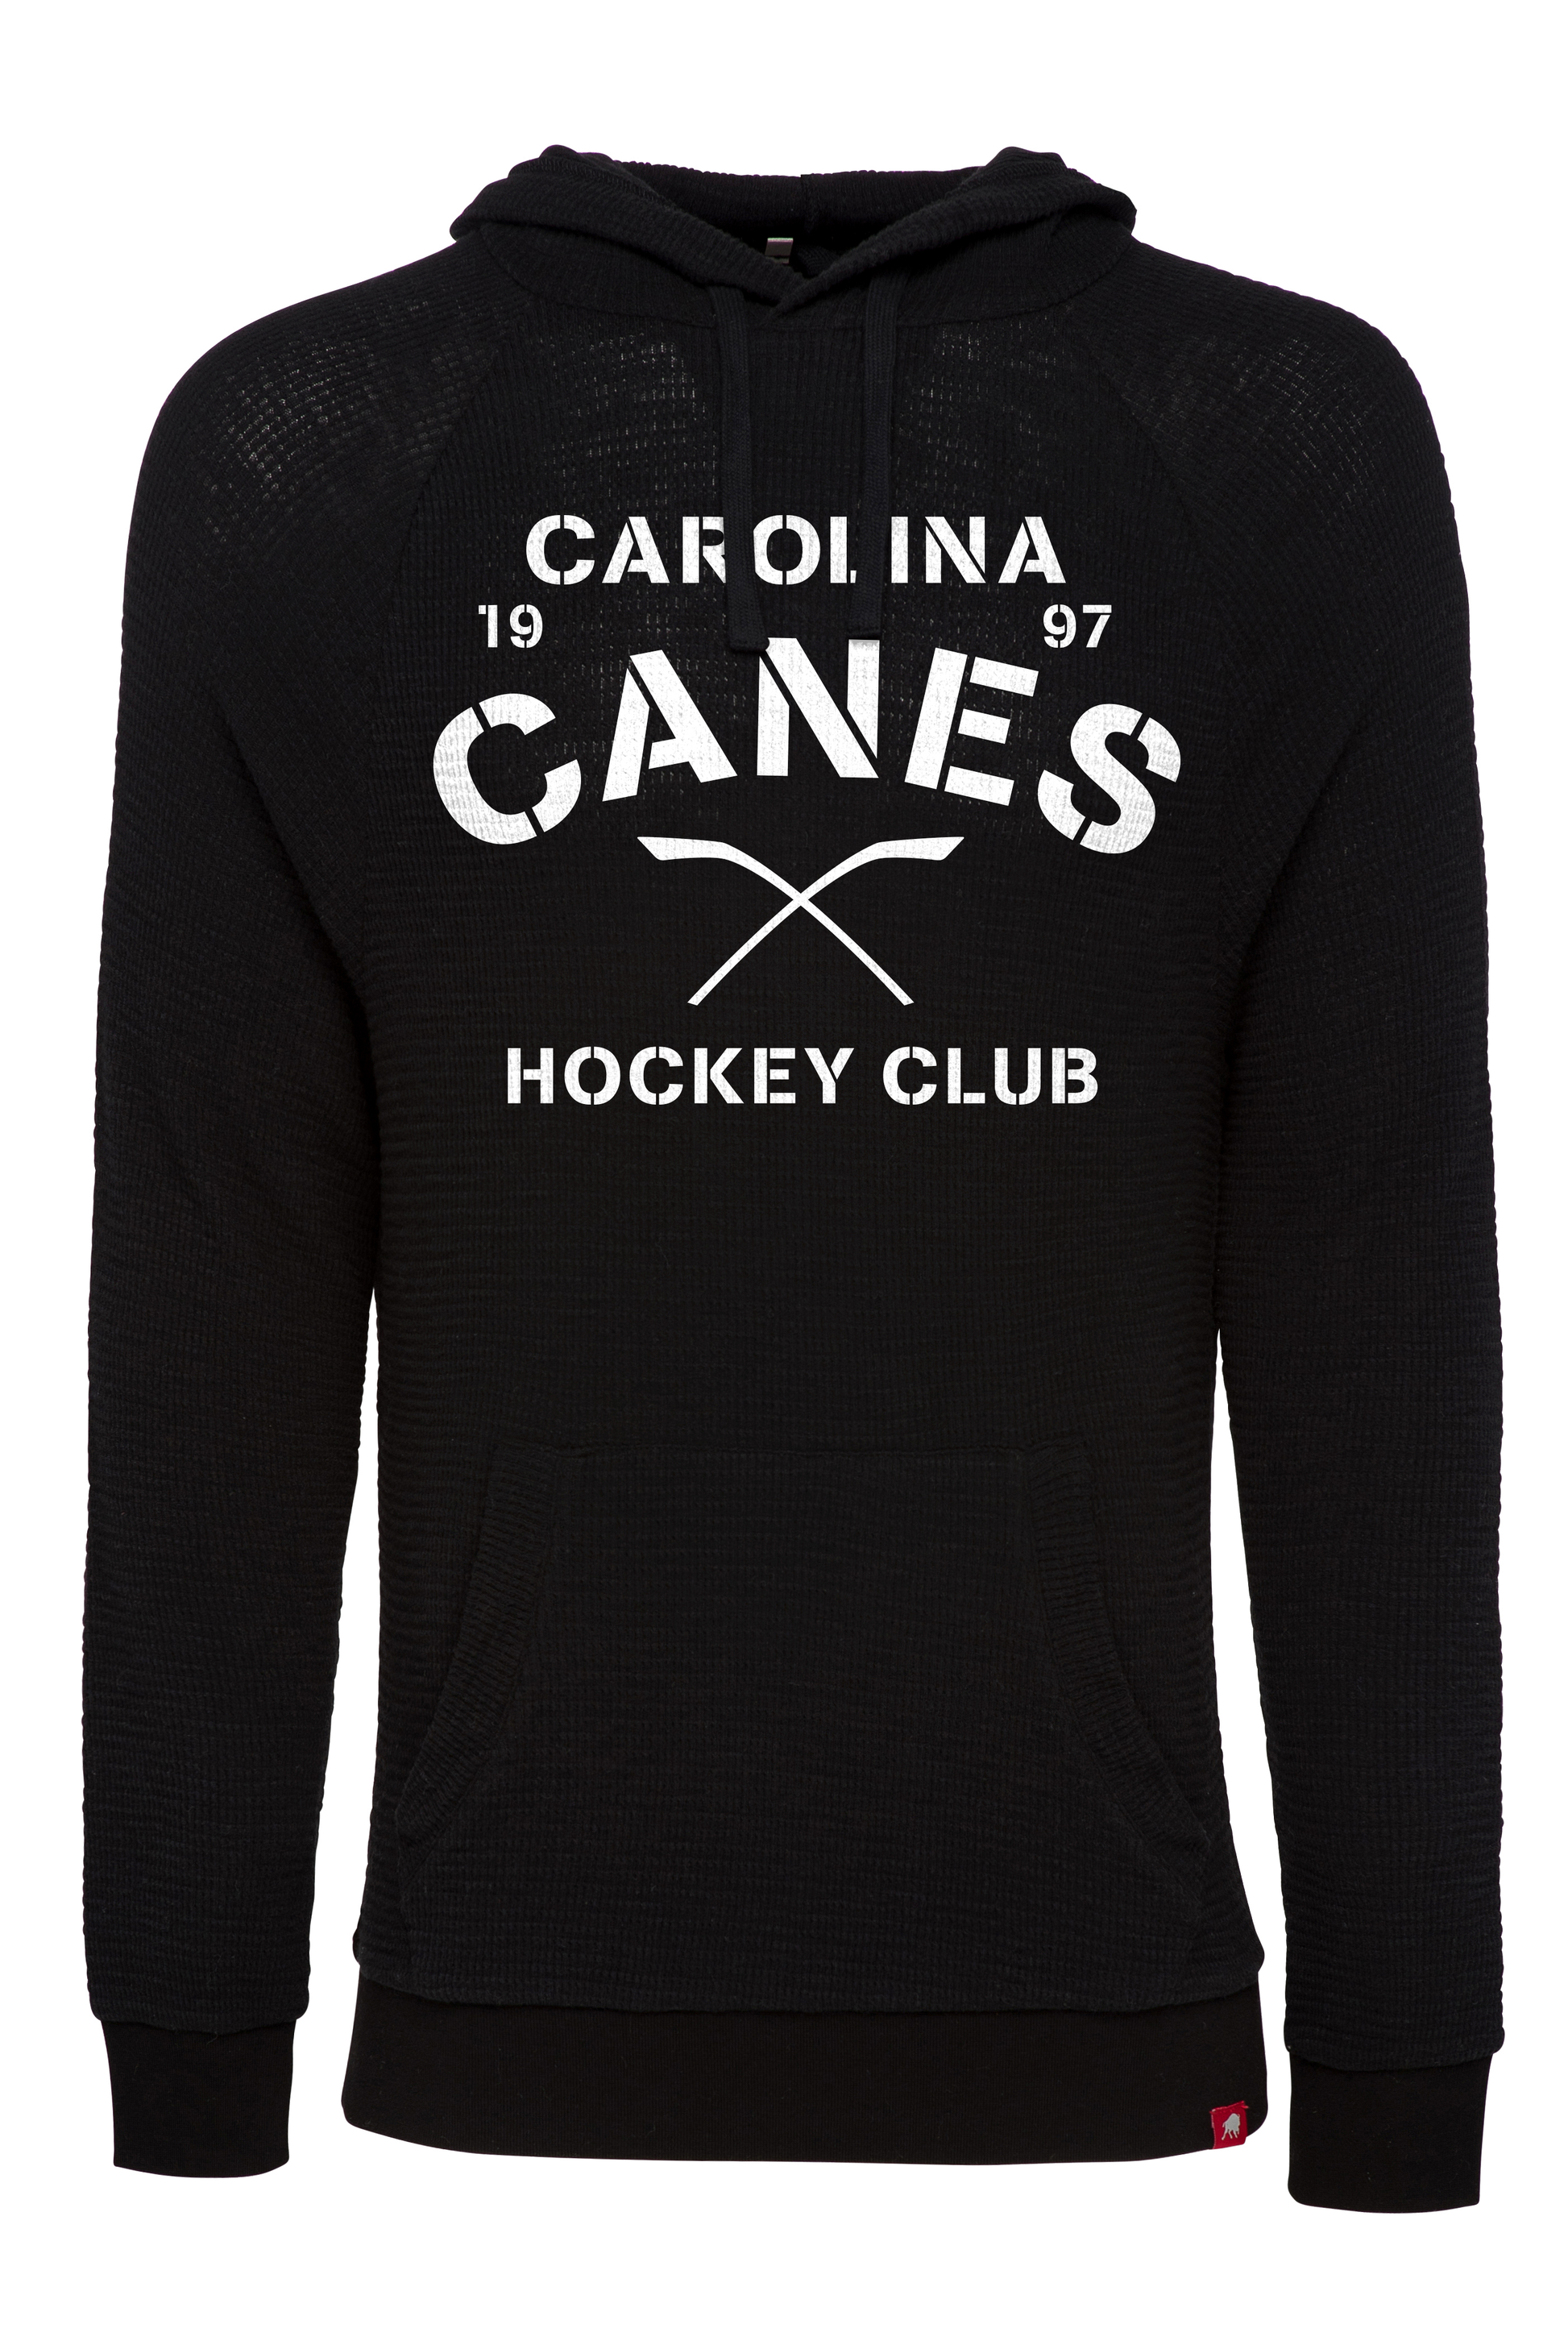 Black hoodie with Carolina Hurricanes Hockey Club 1997 graphic on front.